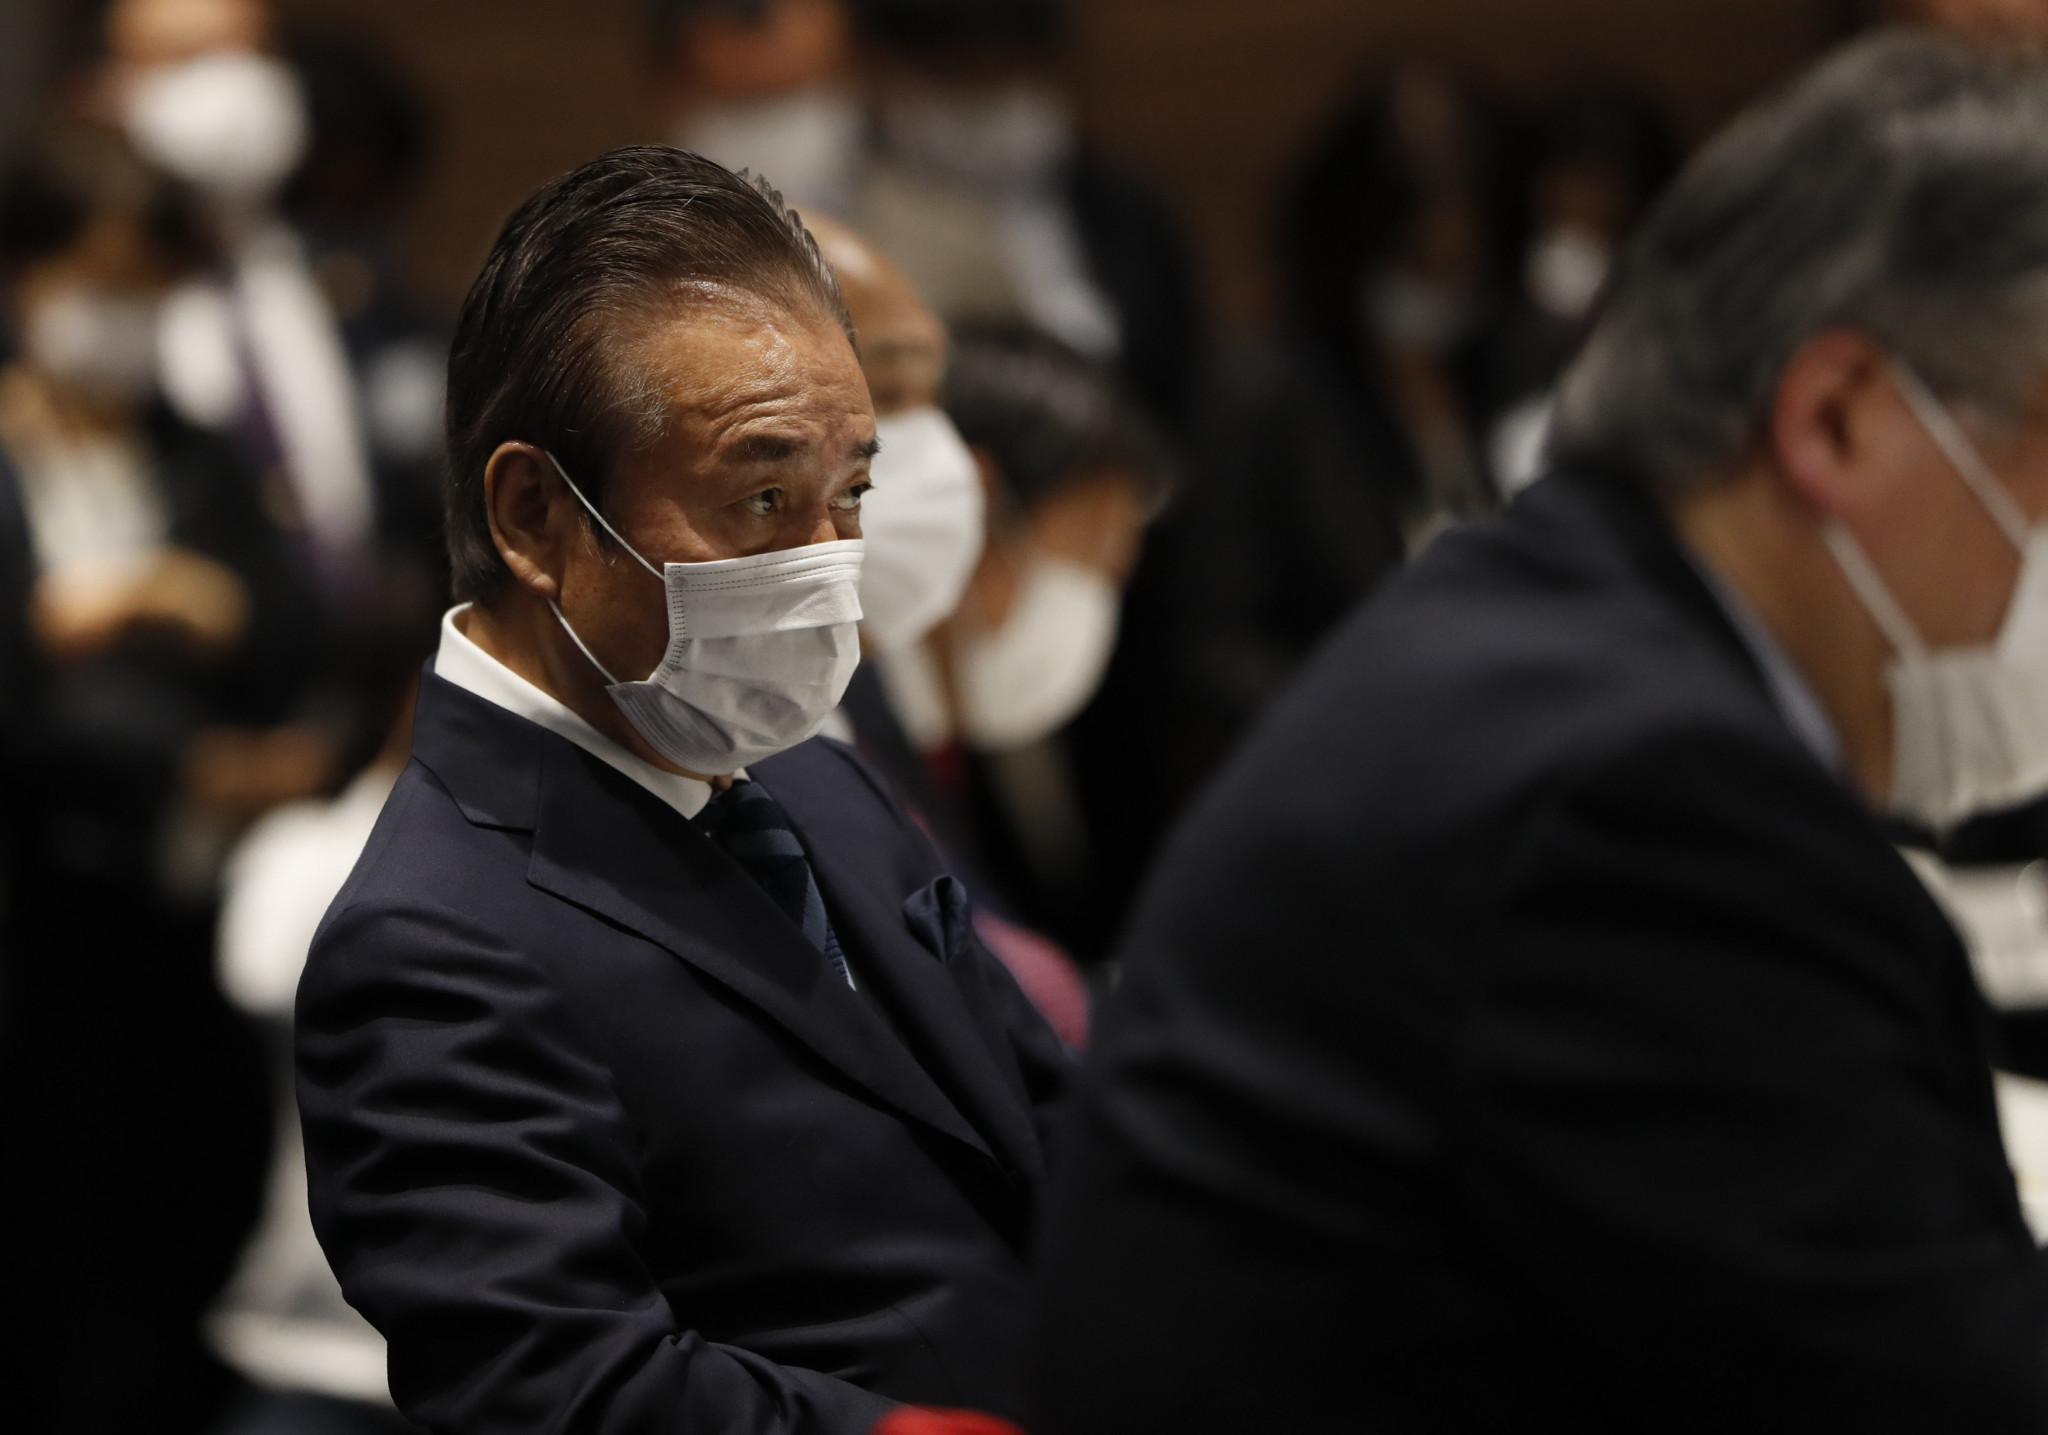 Tokyo 2020 sponsors have rejected having a relationship with Board member Haruyuki Takahashi ©Getty Images